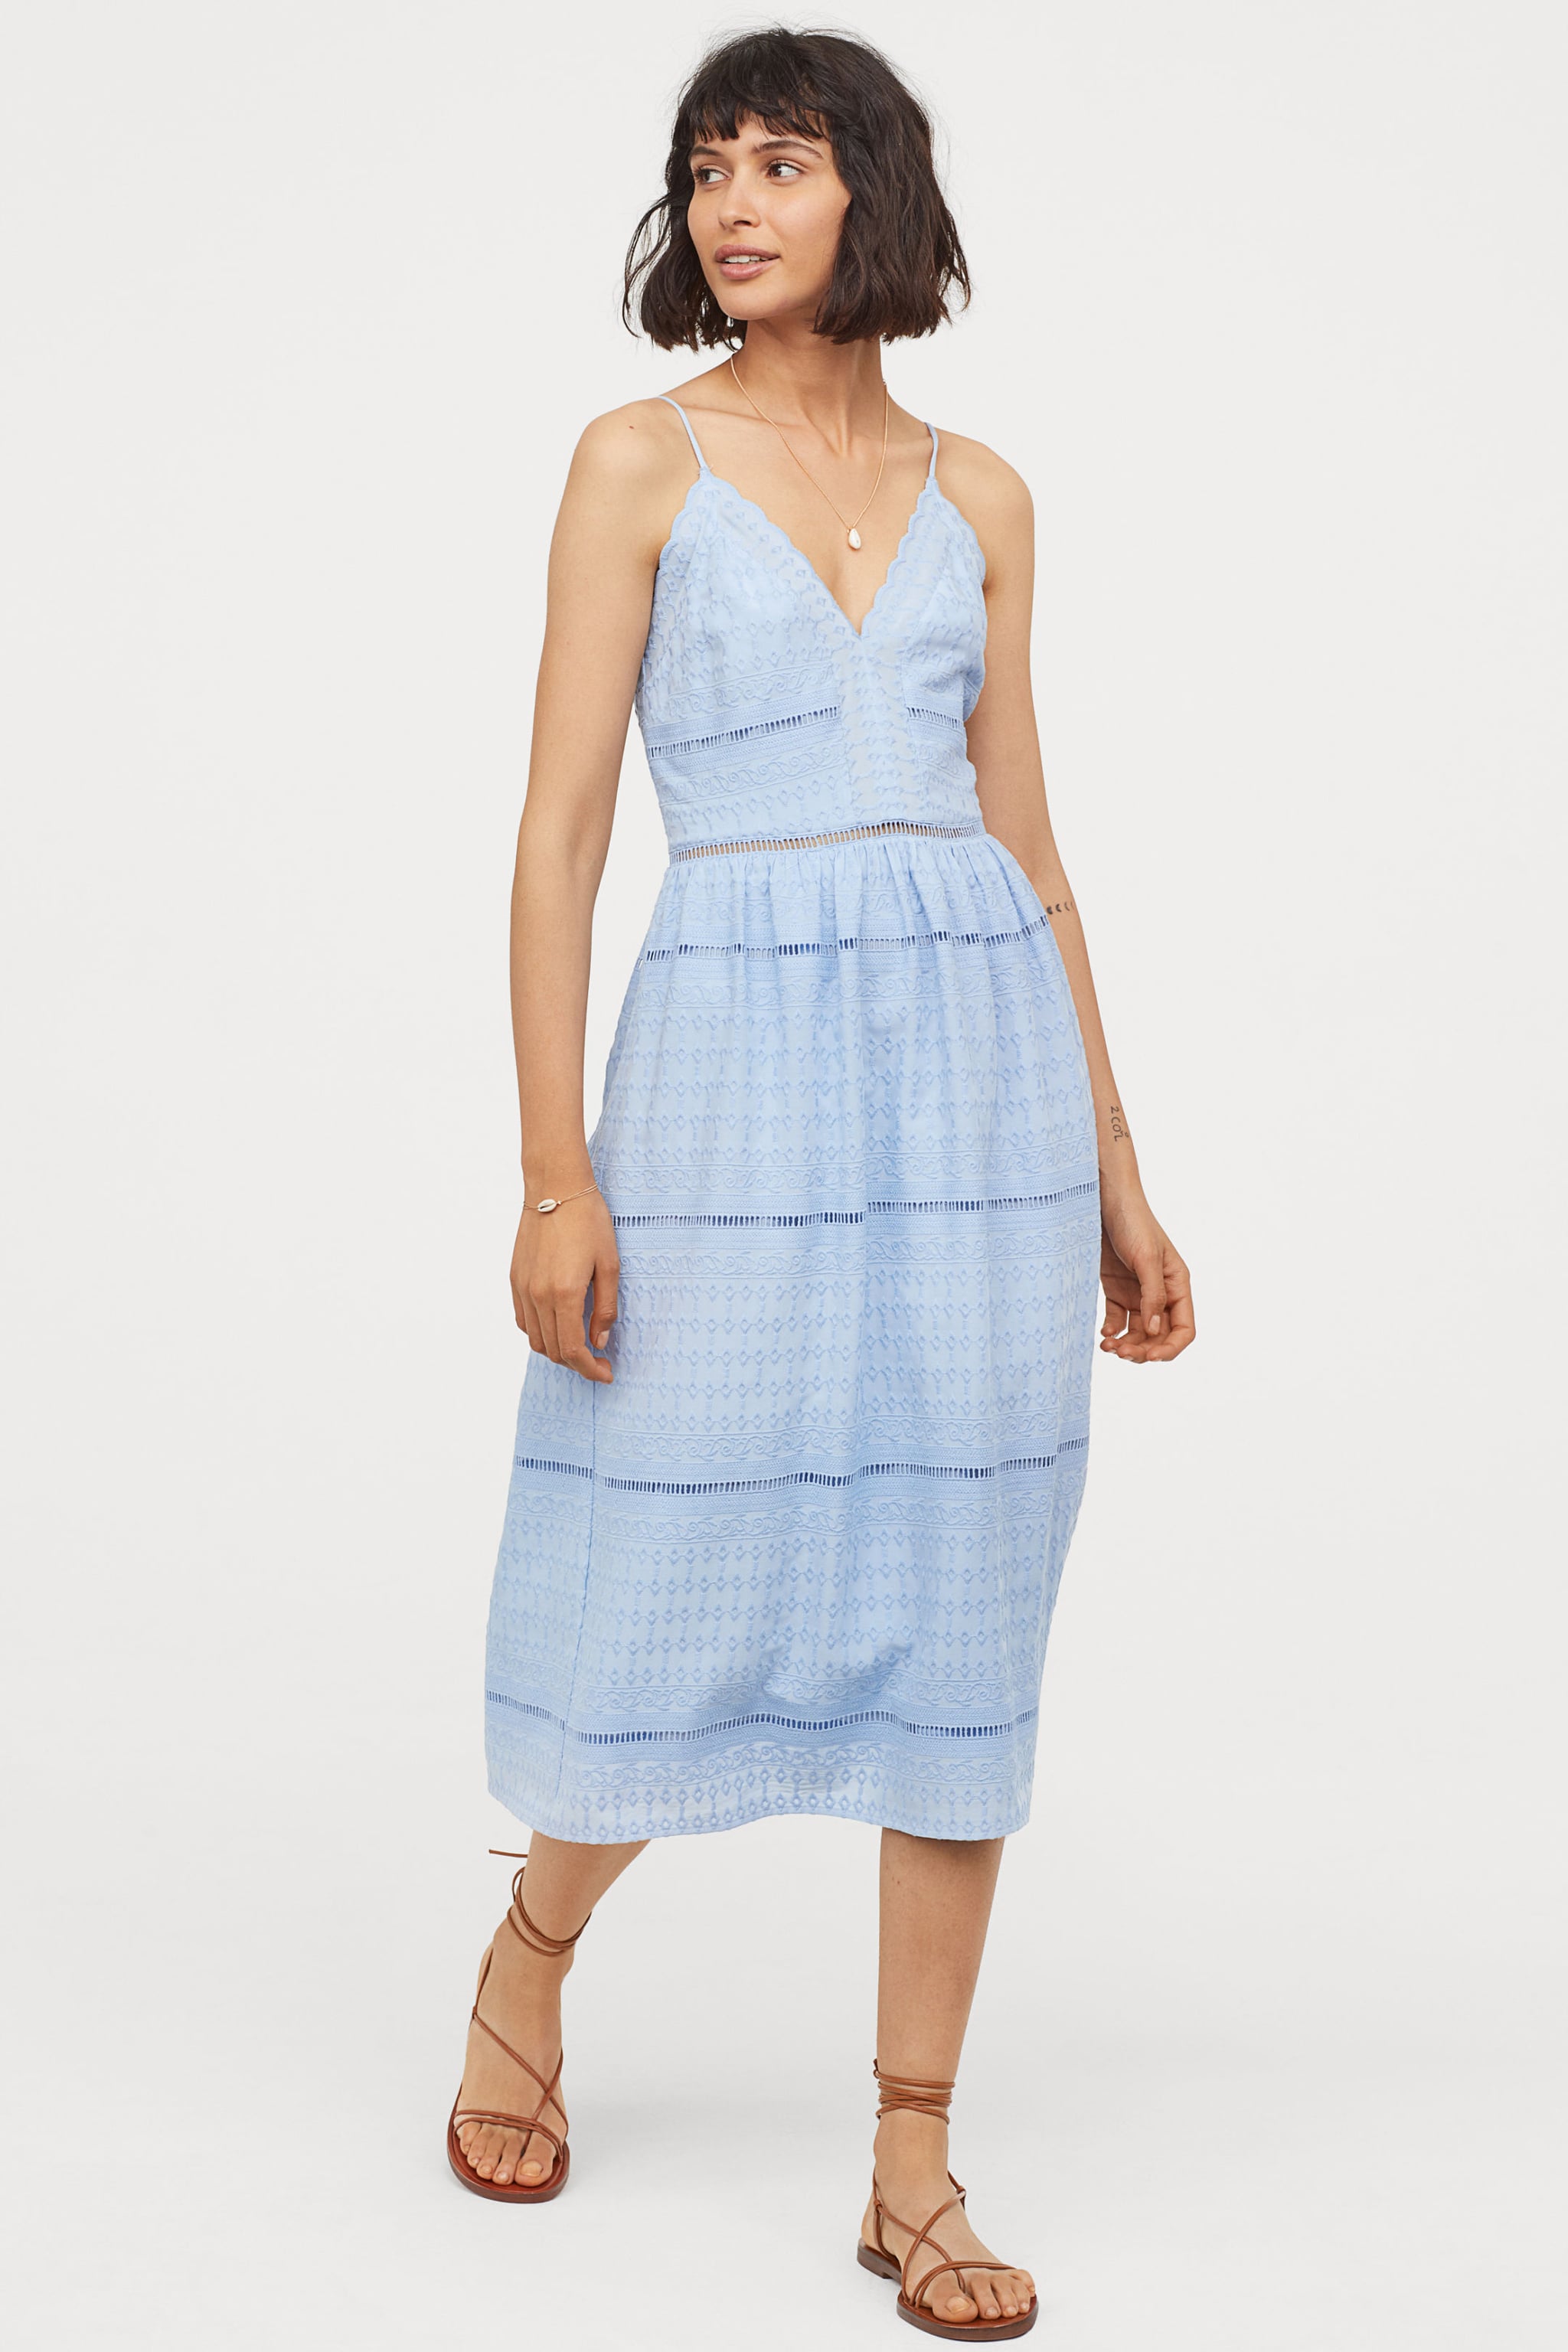 h&m blue embroidered dress